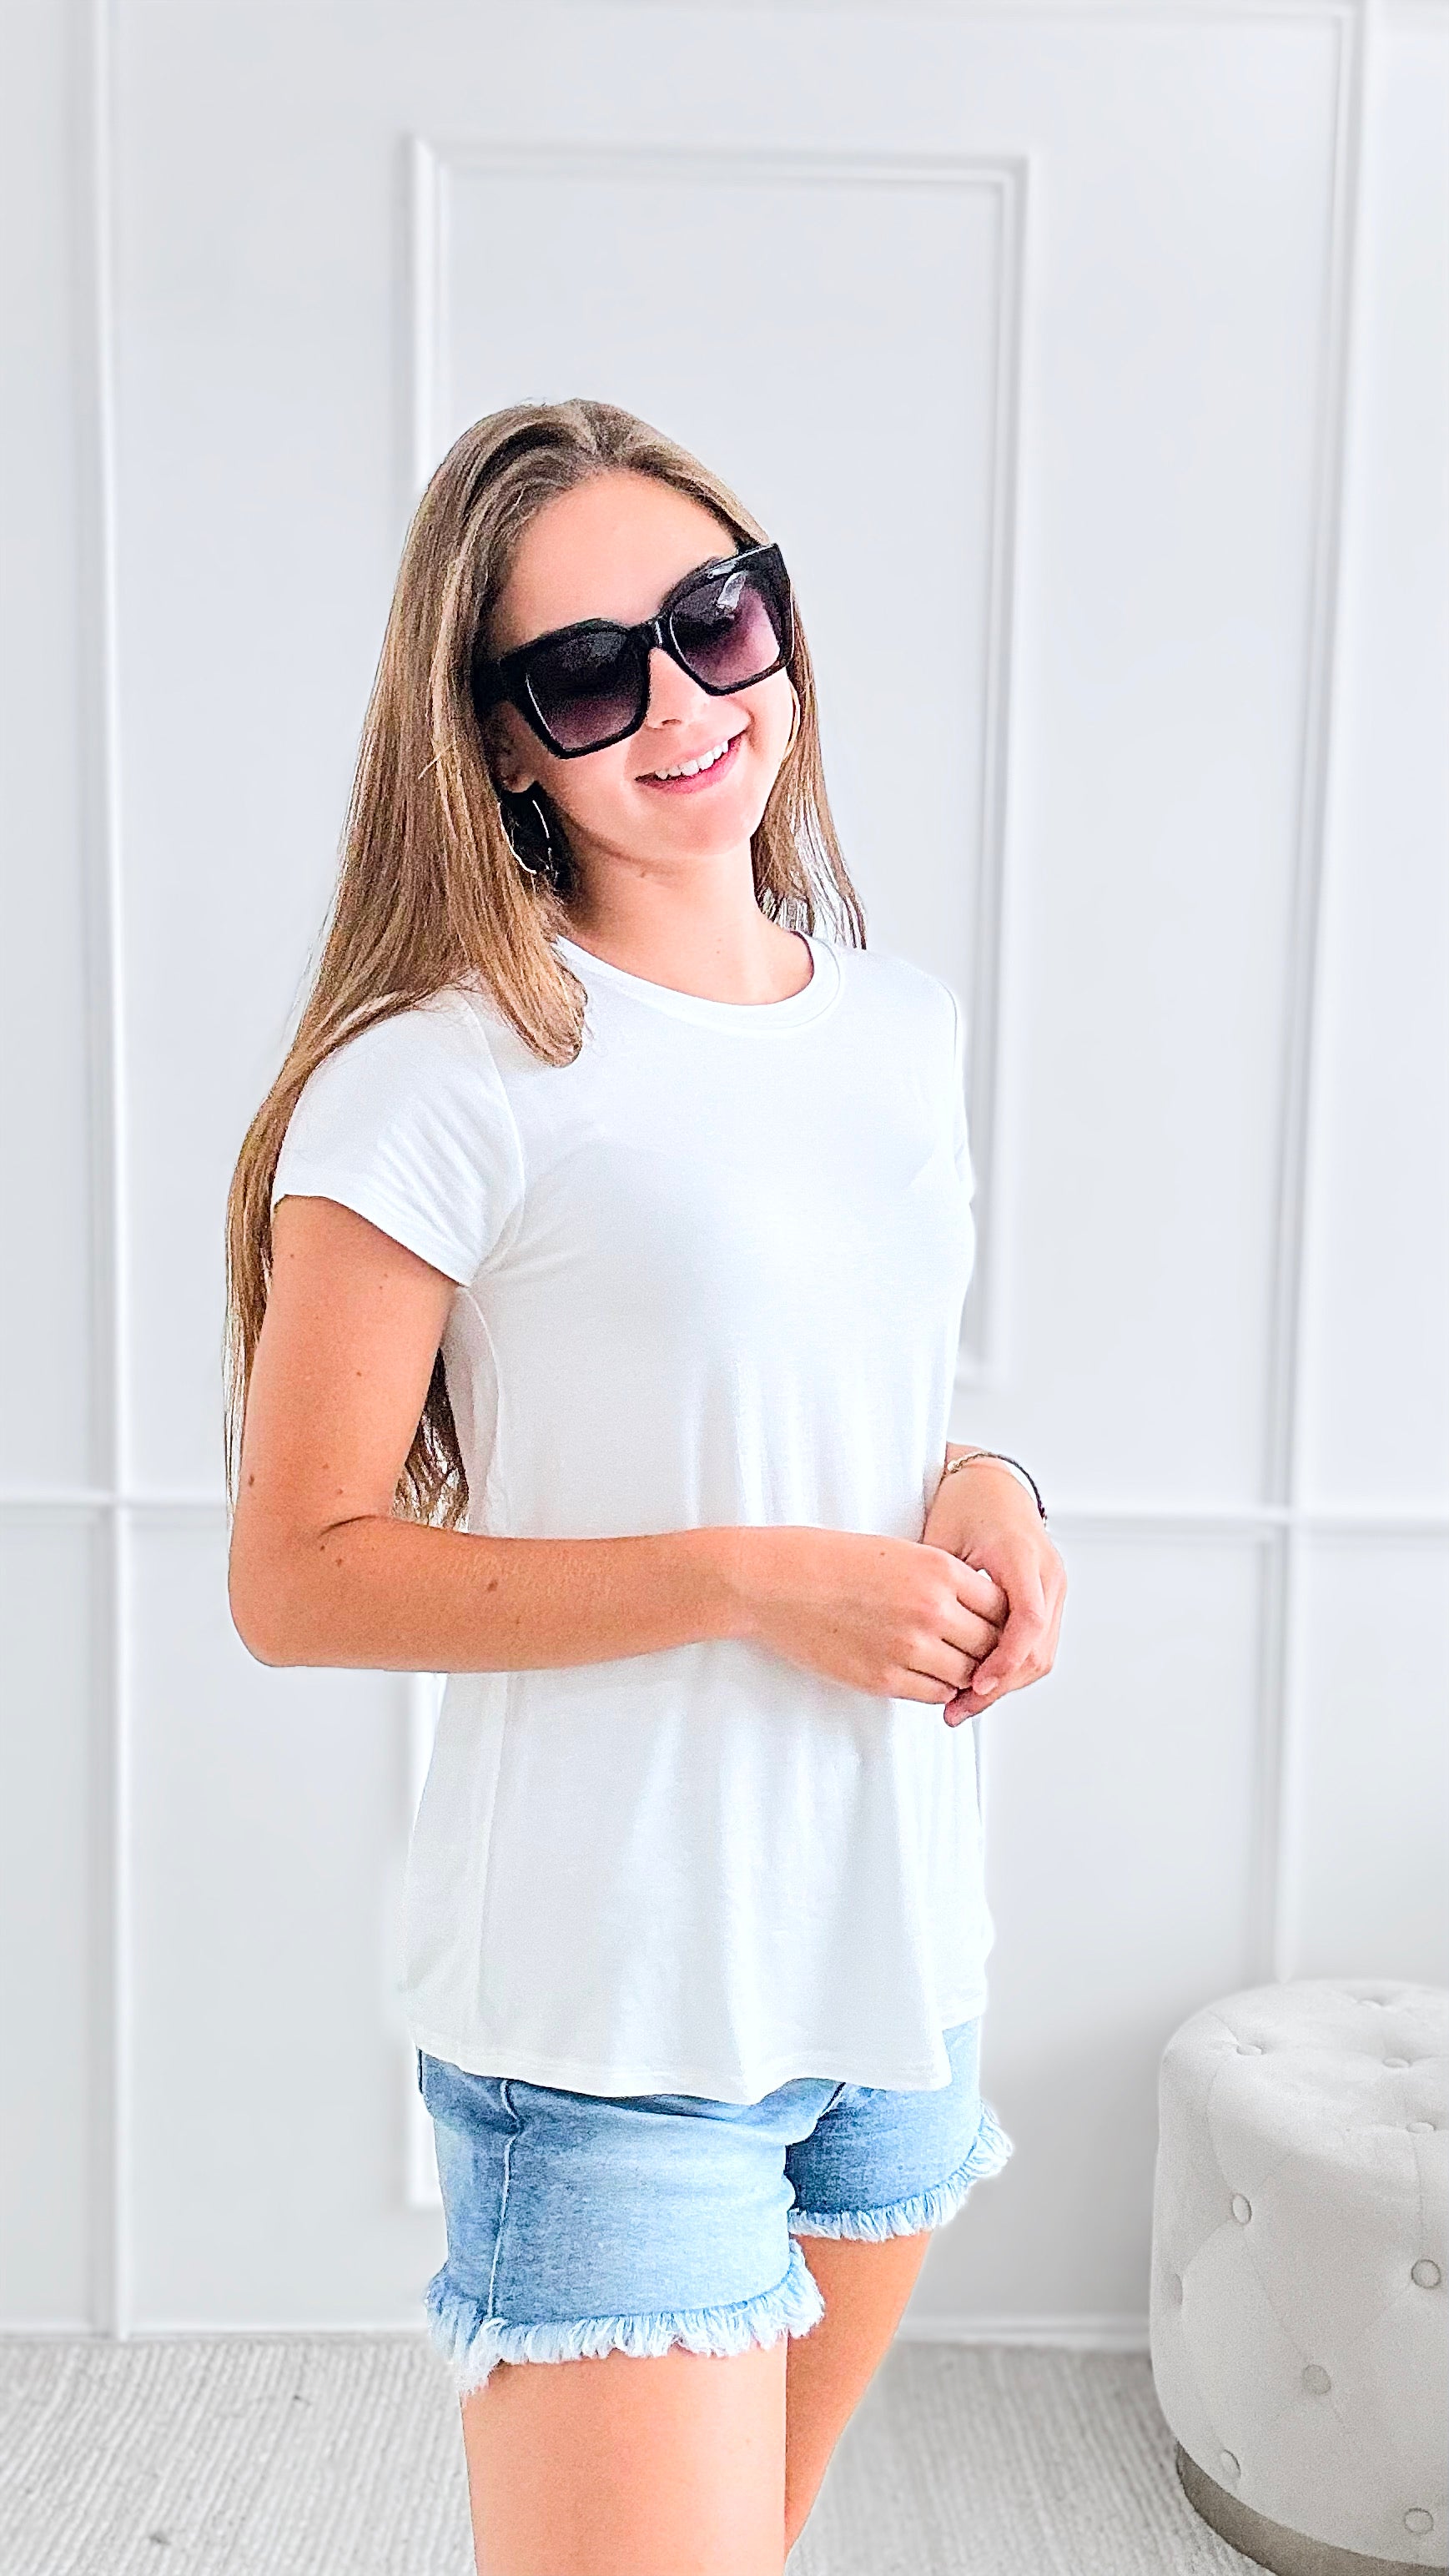 Round Hem Short Sleeve Top - Off White-110 Short Sleeve Tops-Zenana-Coastal Bloom Boutique, find the trendiest versions of the popular styles and looks Located in Indialantic, FL